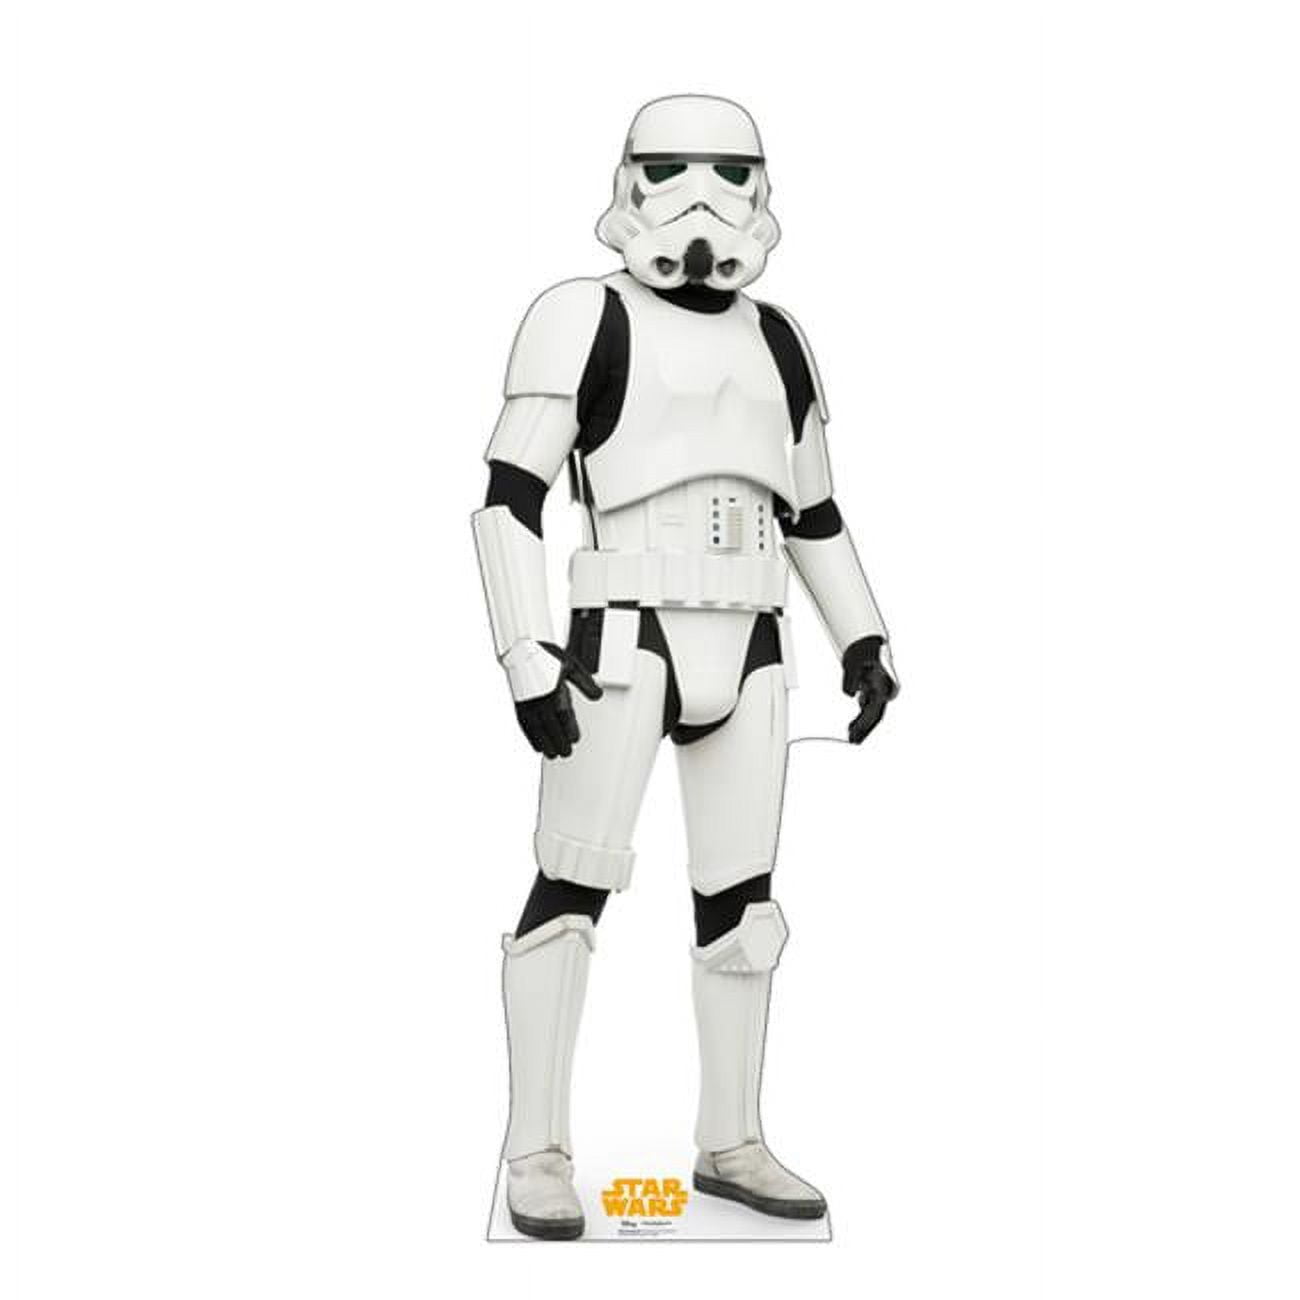 Picture of Advanced Graphics 2663 Stormtrooper Cardboard Cutout - Star Wars Han Solo Movie